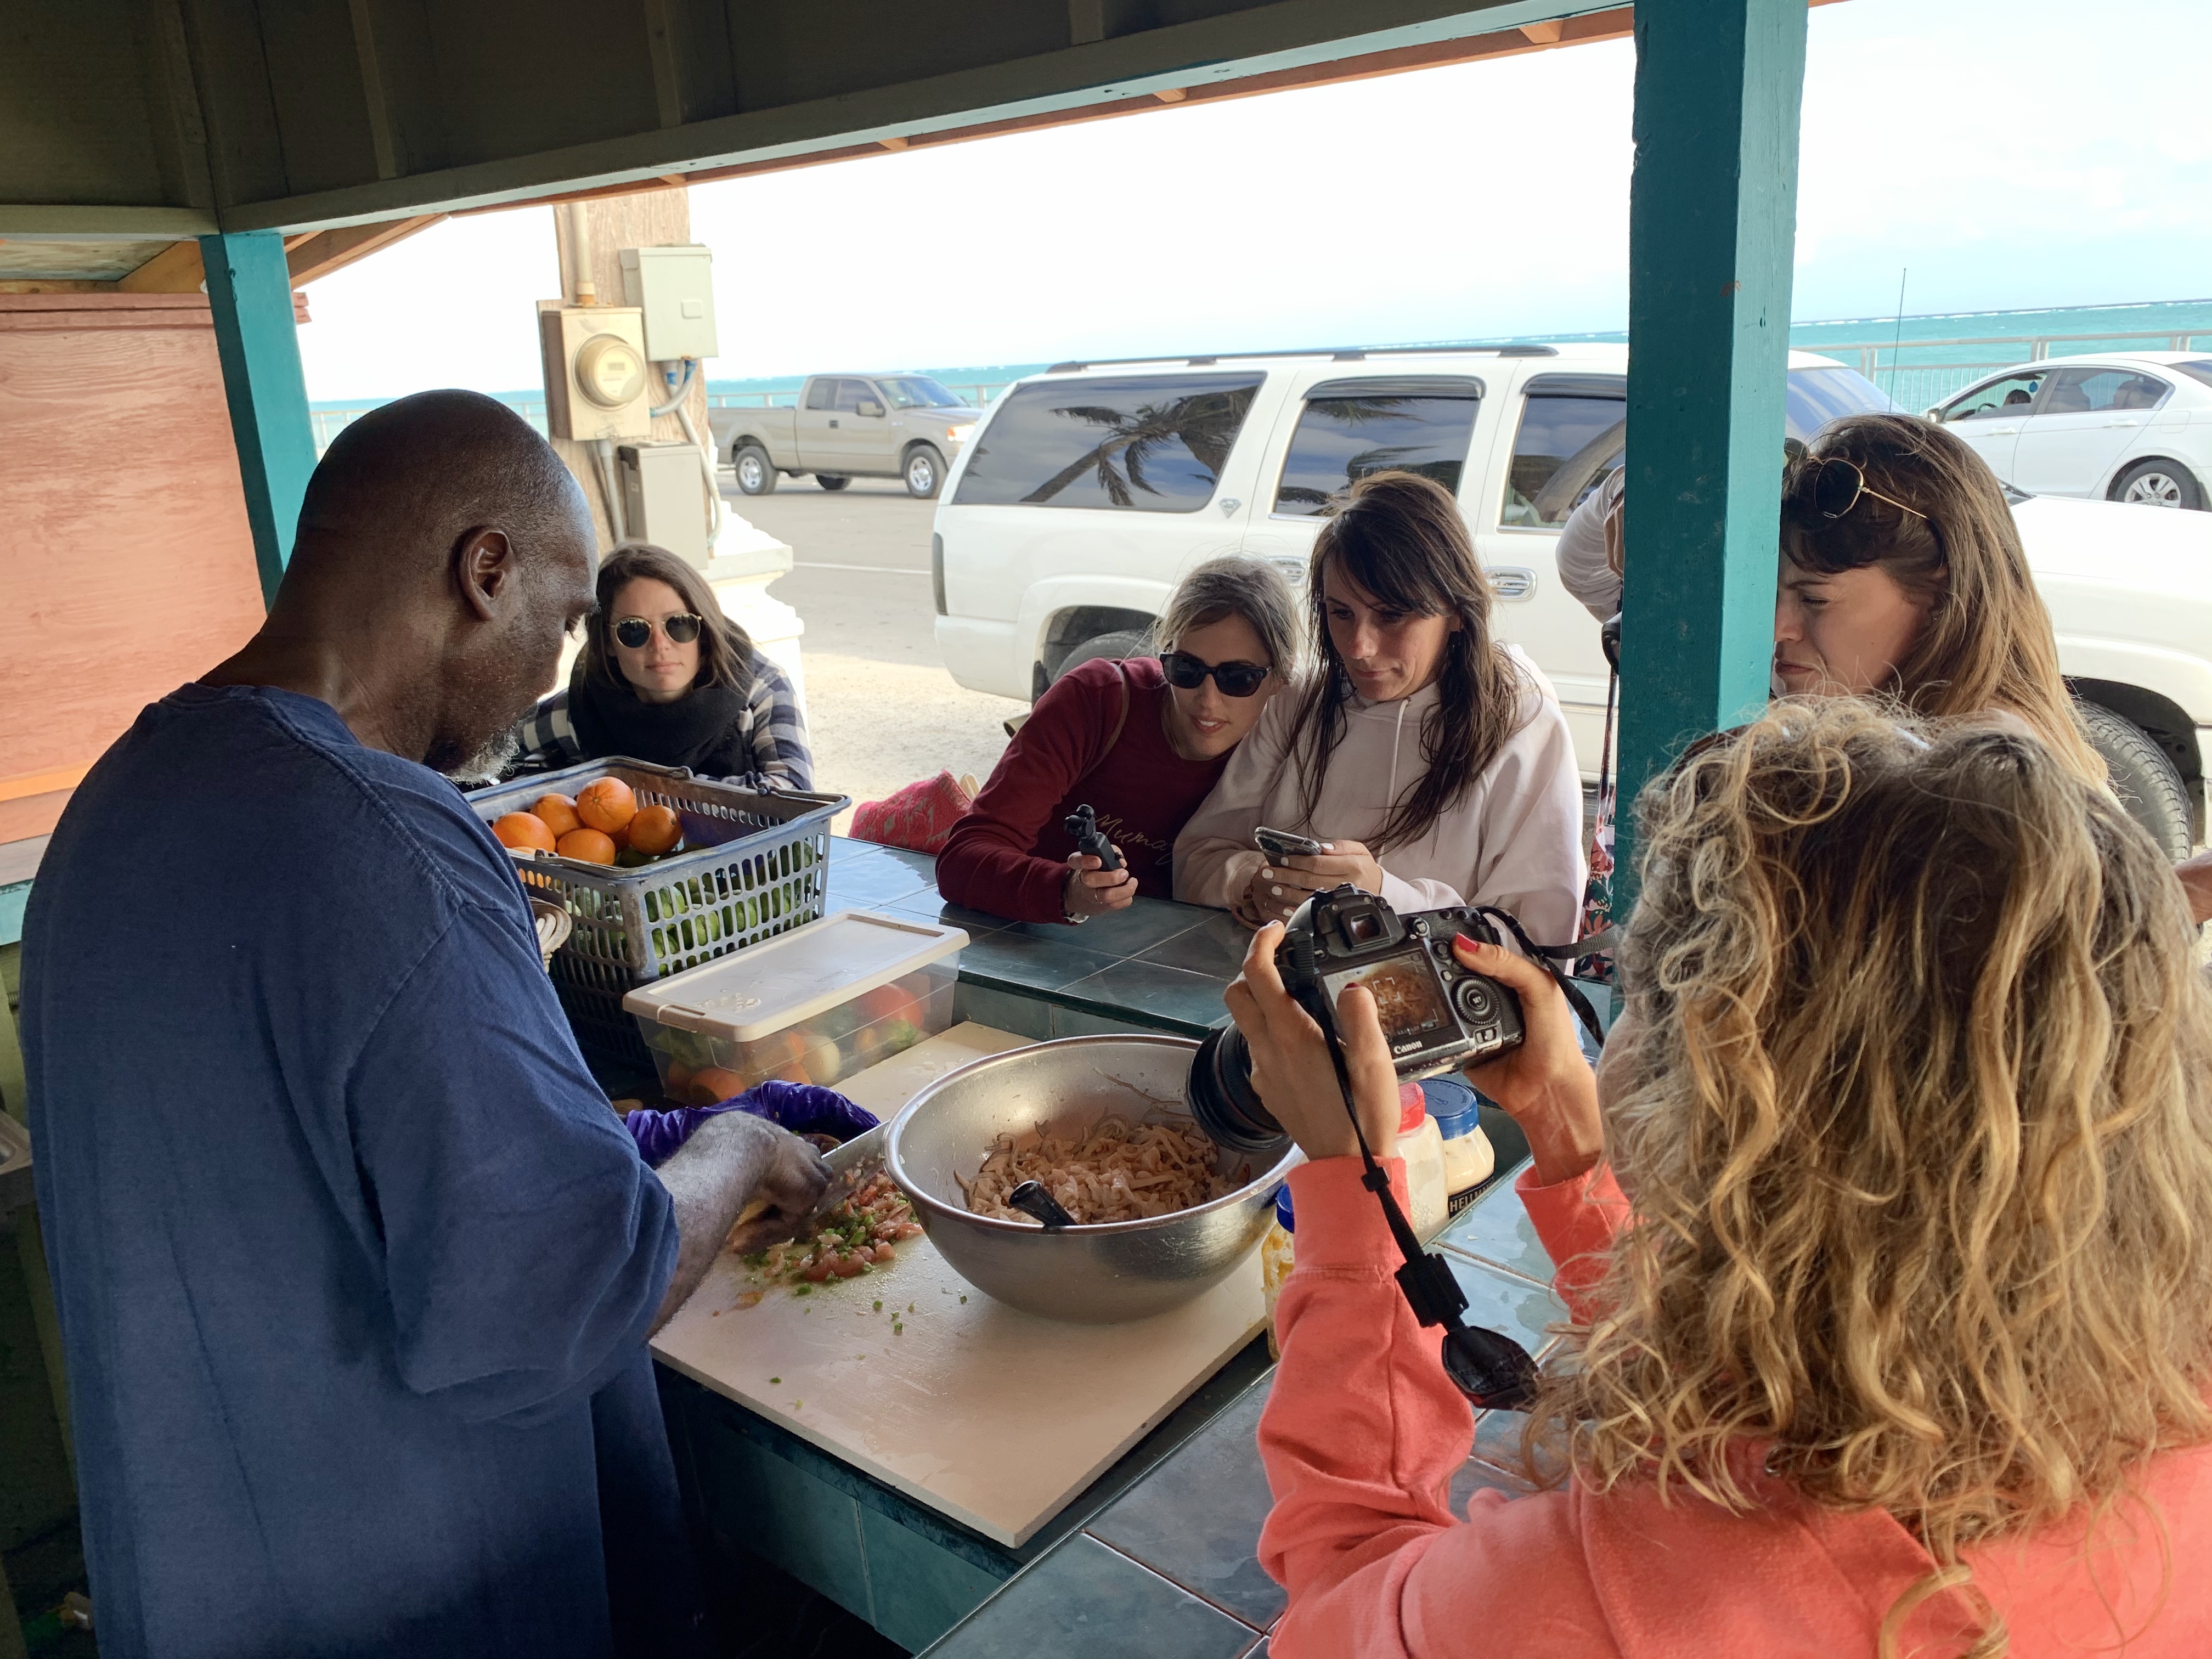 Terry of Terry’s Conch Stand in Smith’s Point shows his guests how he makes his signature conch salad.